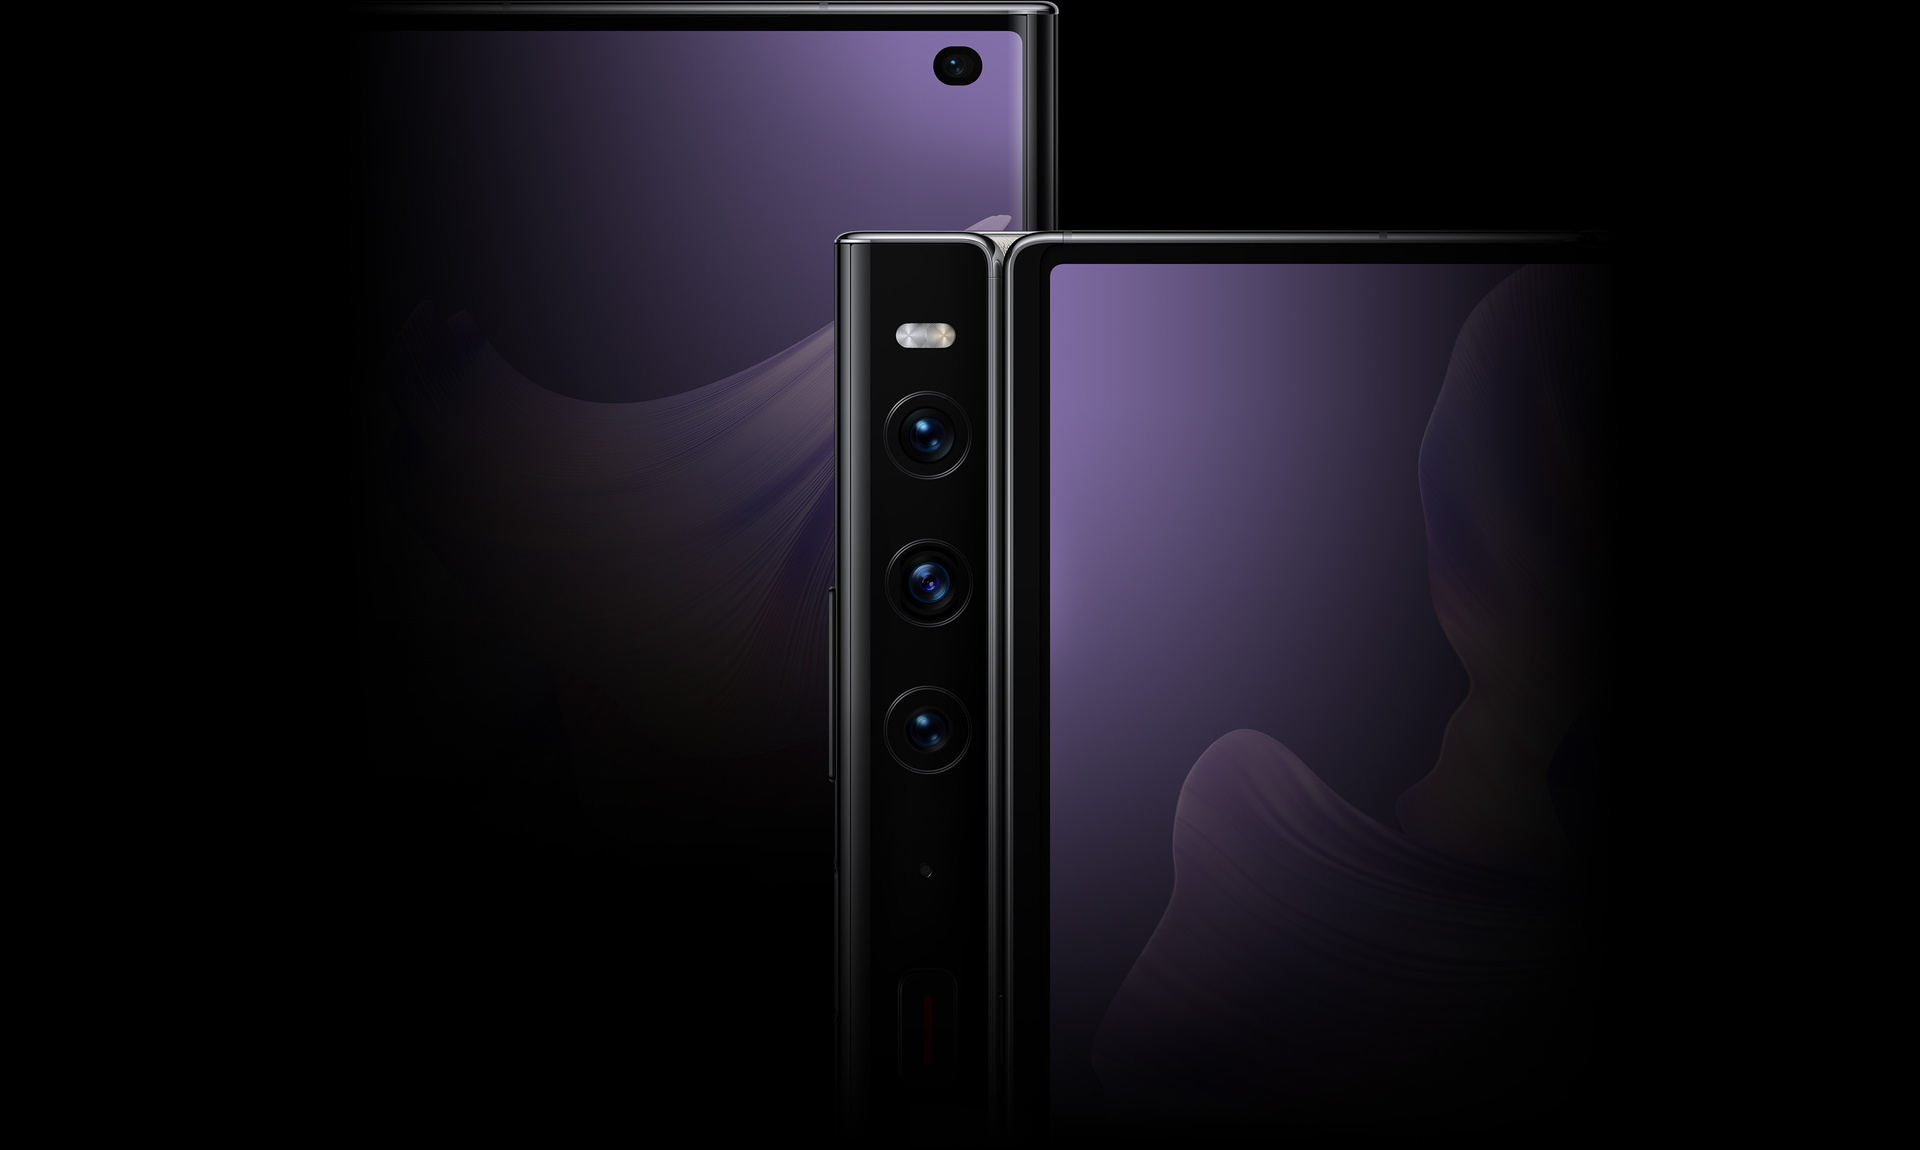 Huawei: Mate Xs 2, Officially announced on April 28, 2022, Qualcomm SM8350 Snapdragon 888 4G Octa-core processor. 1920x1150 HD Wallpaper.